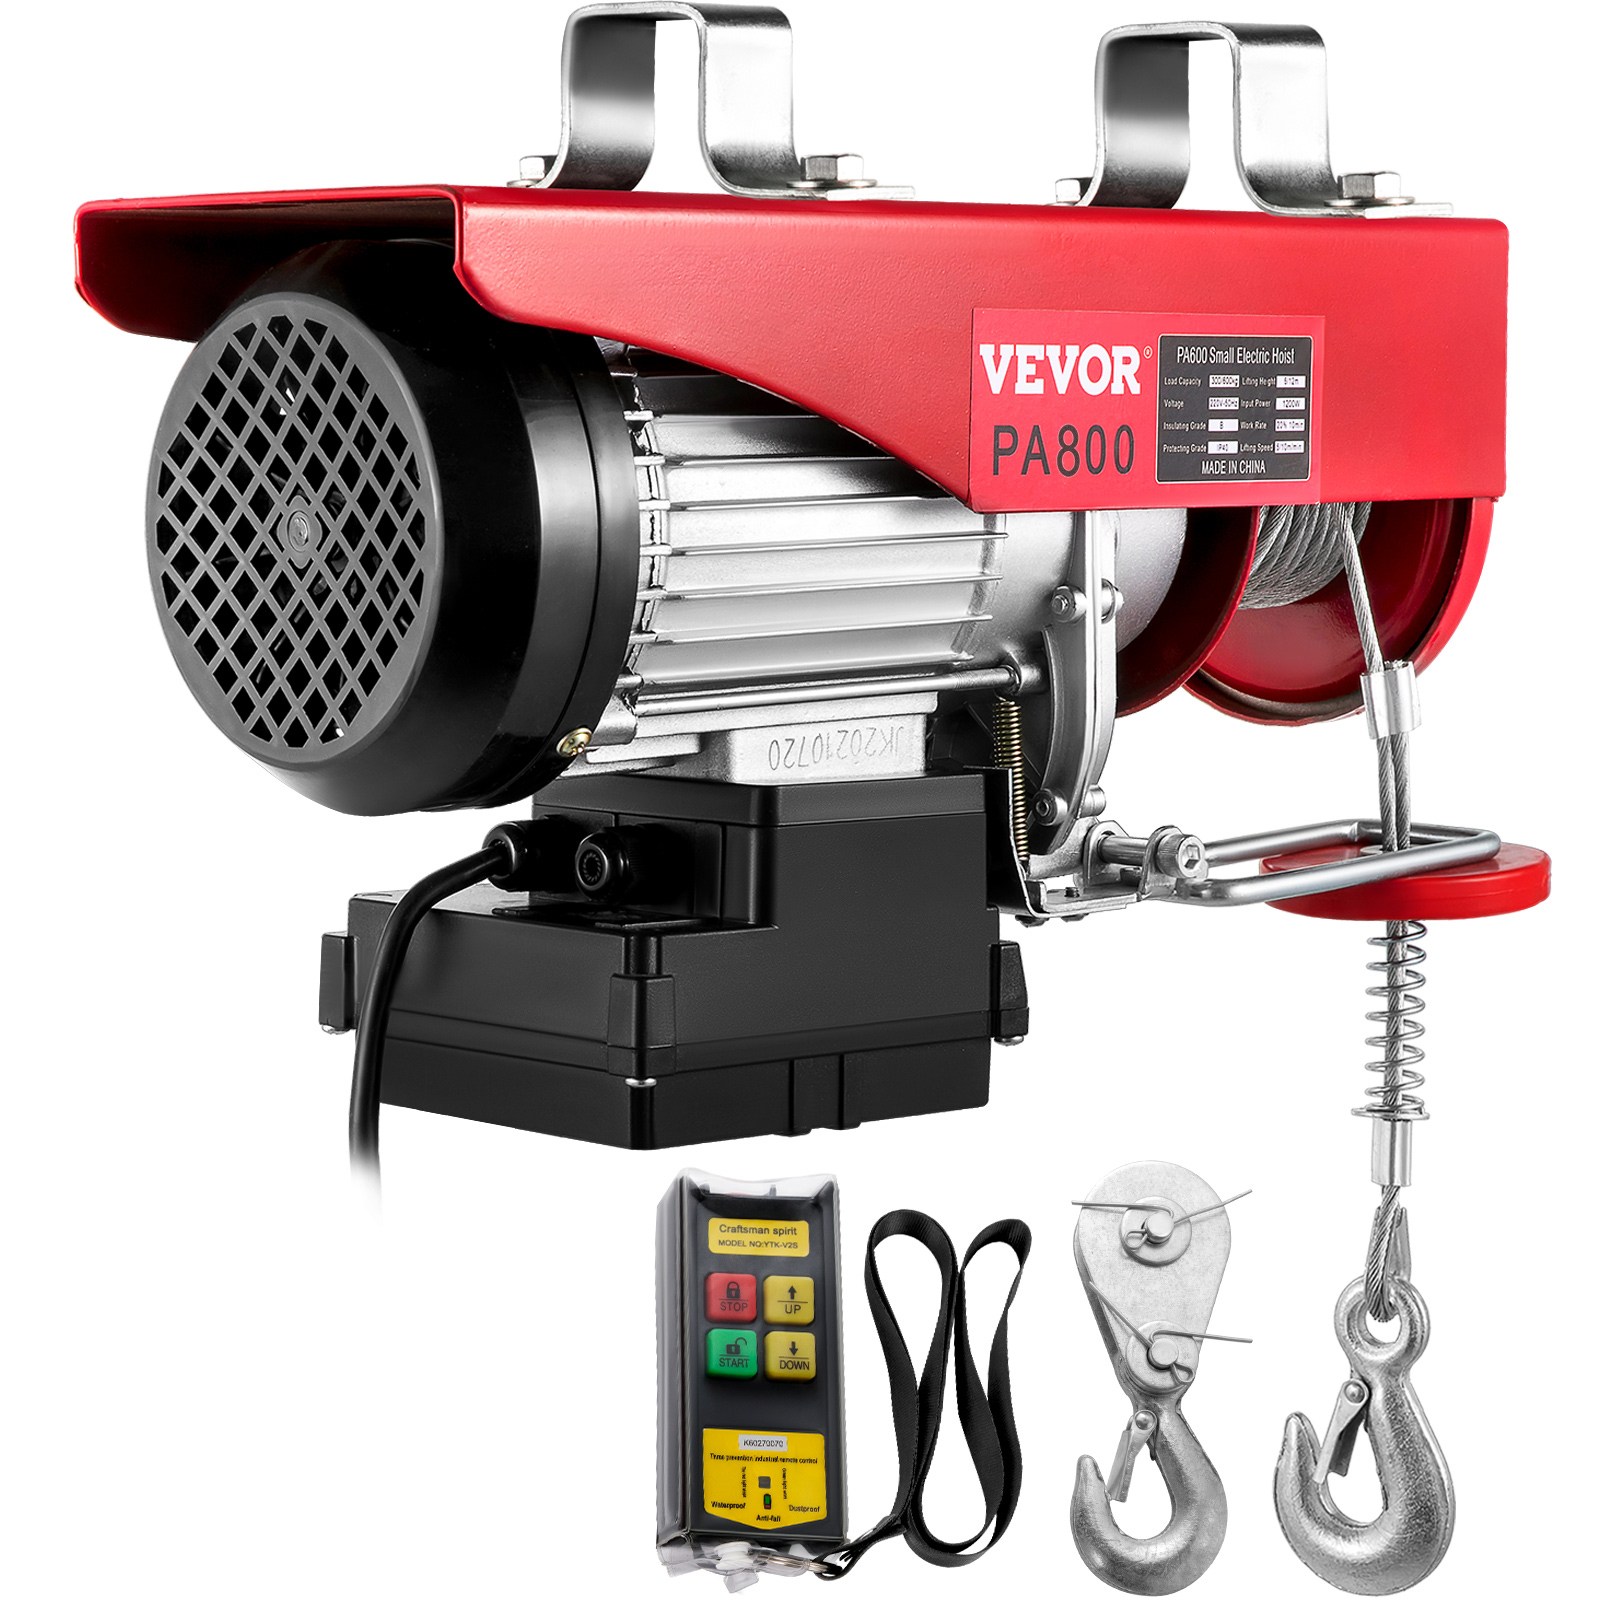 VEVOR Electric Hoist 110V Electric Winch 1800LBS with Wireless Remote Control от Vevor Many GEOs